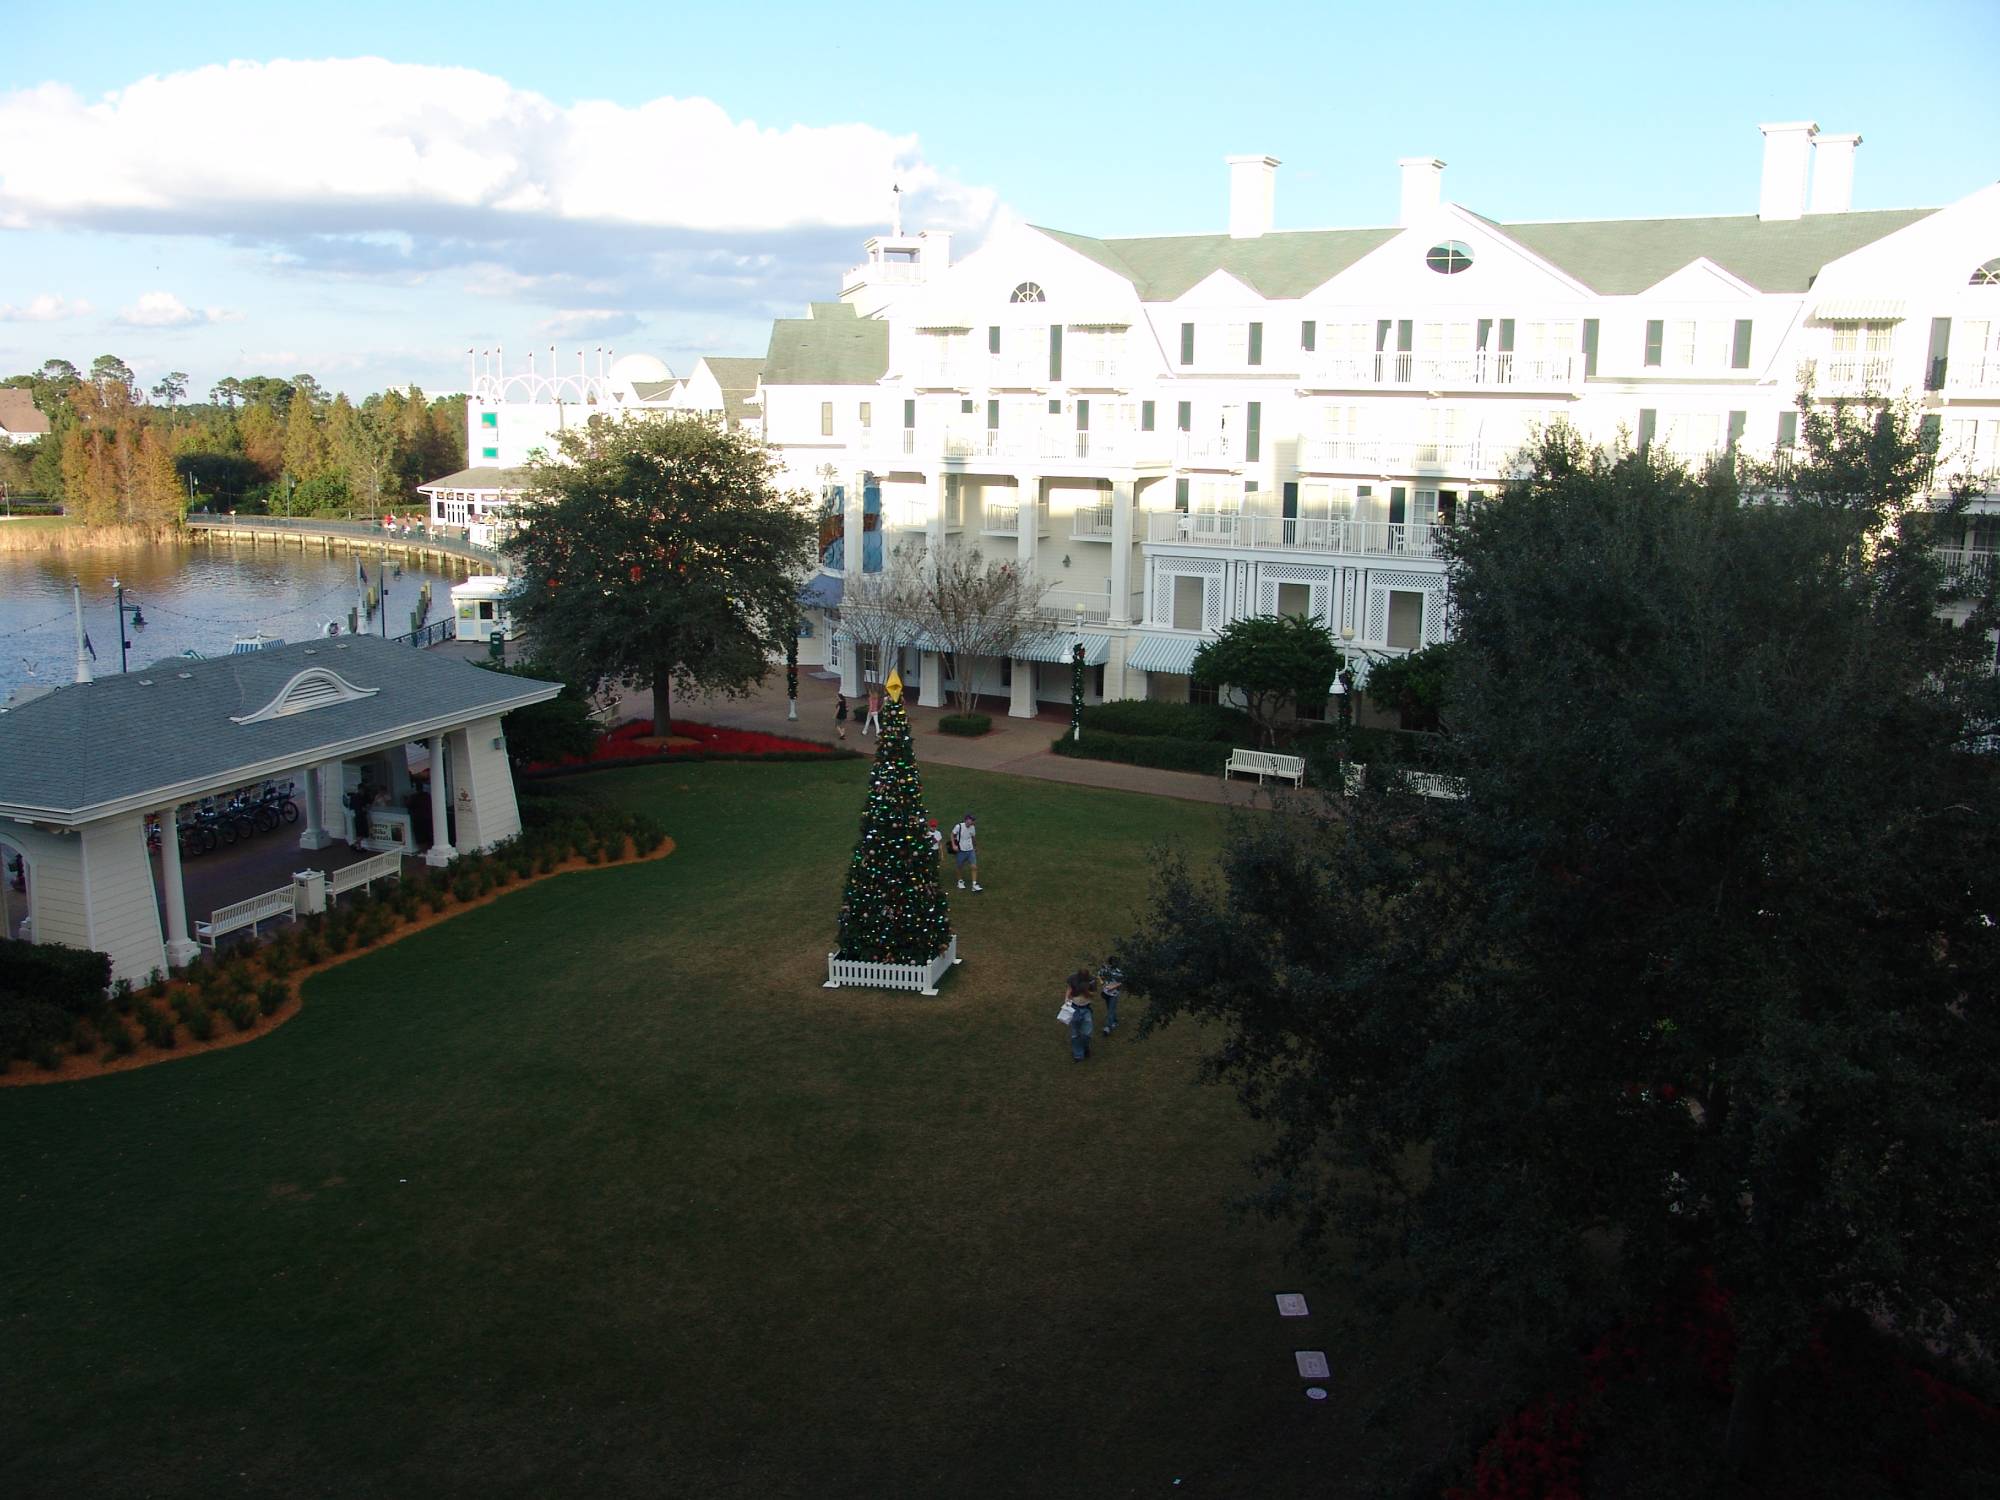 BoardWalk - view over courtyard and towards Inn